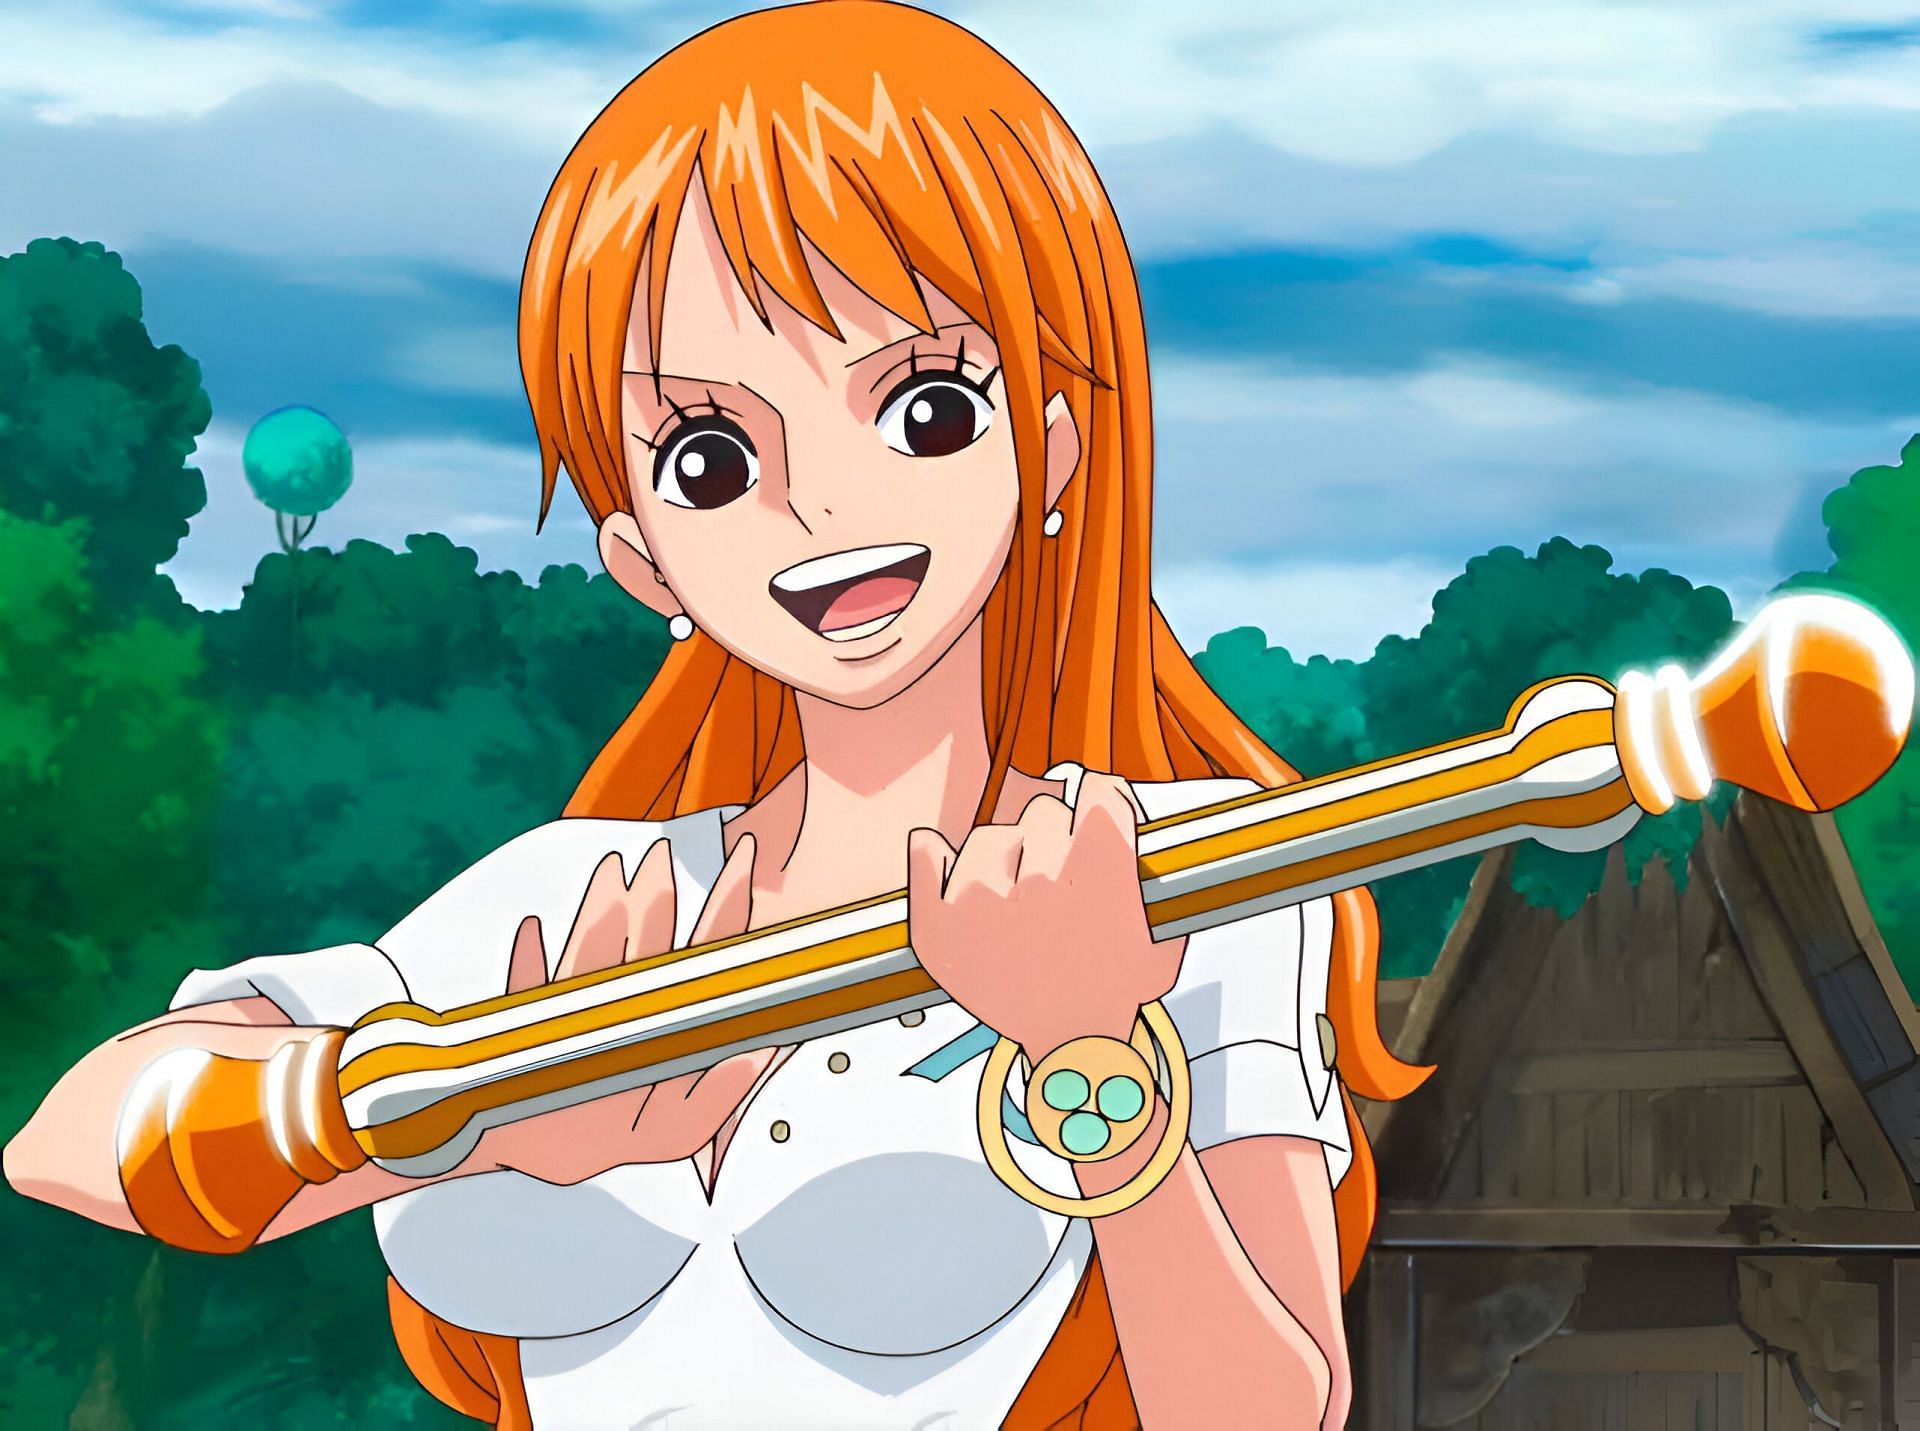 Nami as seen in the anime (Image via Toei Animation)